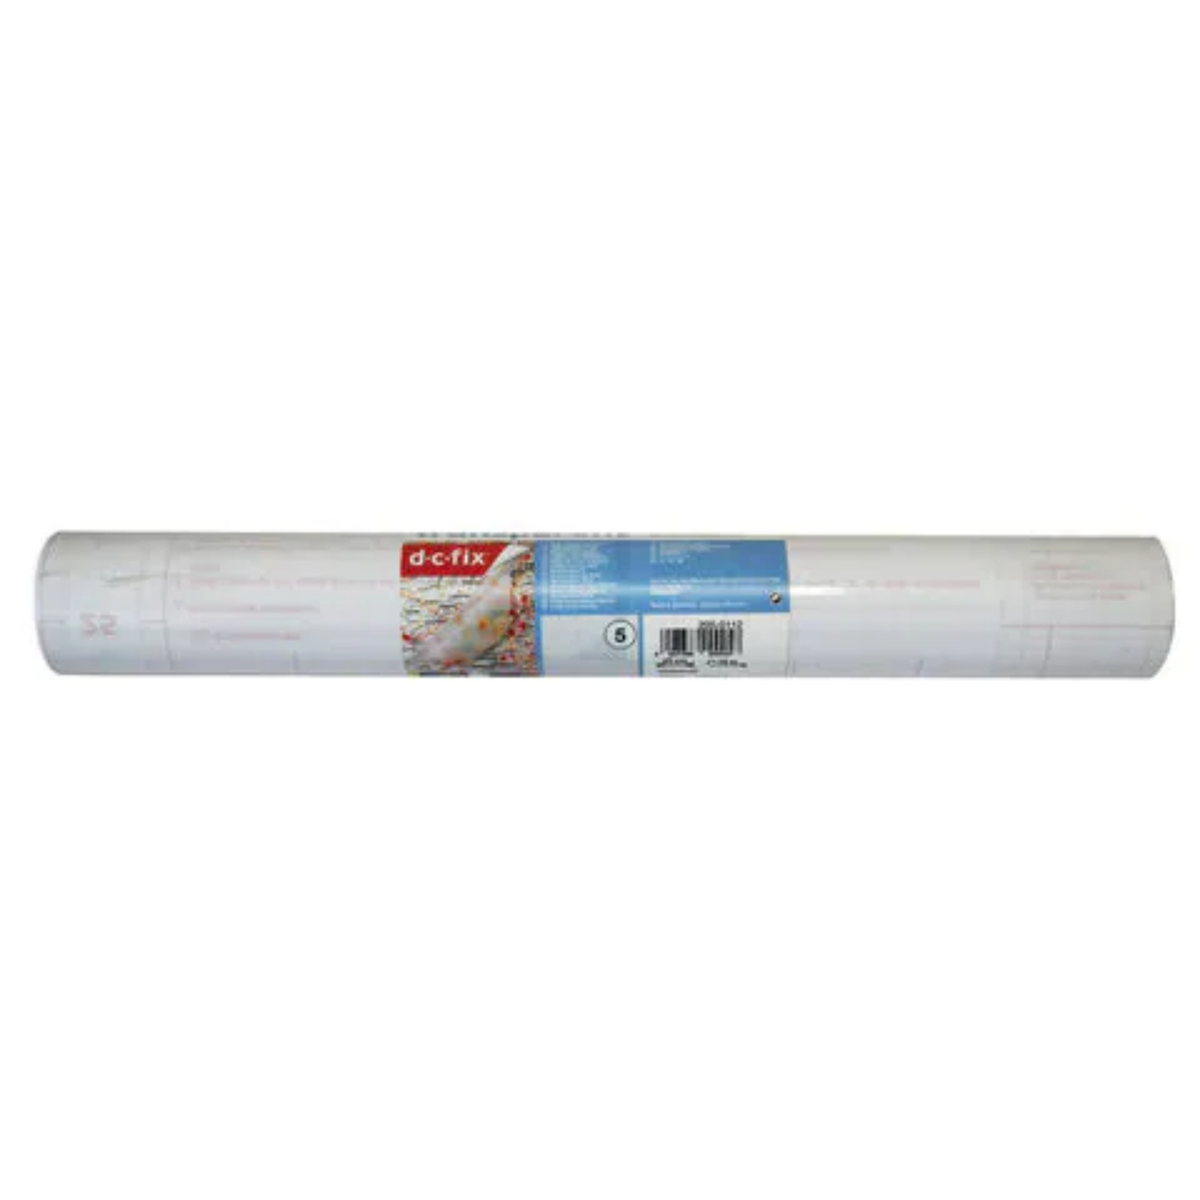 DC-Fix Embosed Book Cover Roll, 45 x 1500 cm, DC-200-7022